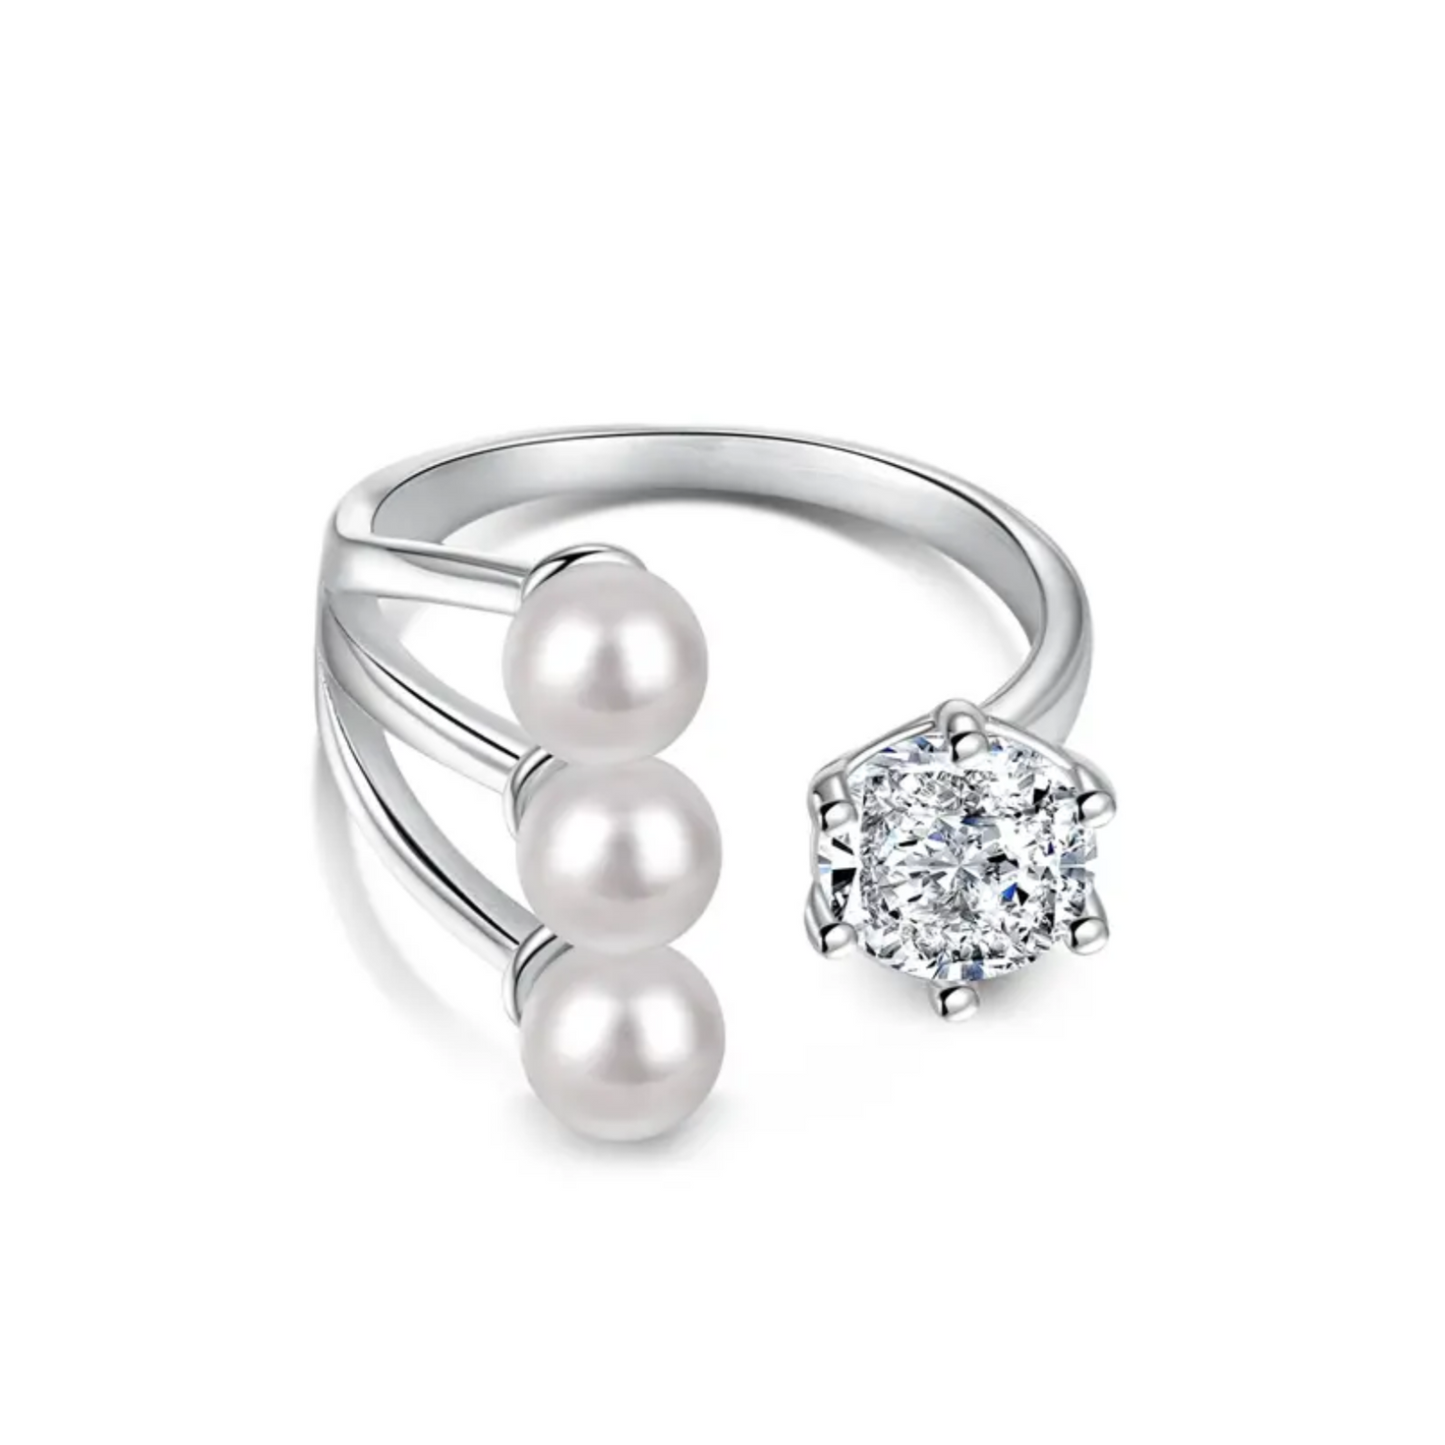 The Indy Pearl Ring